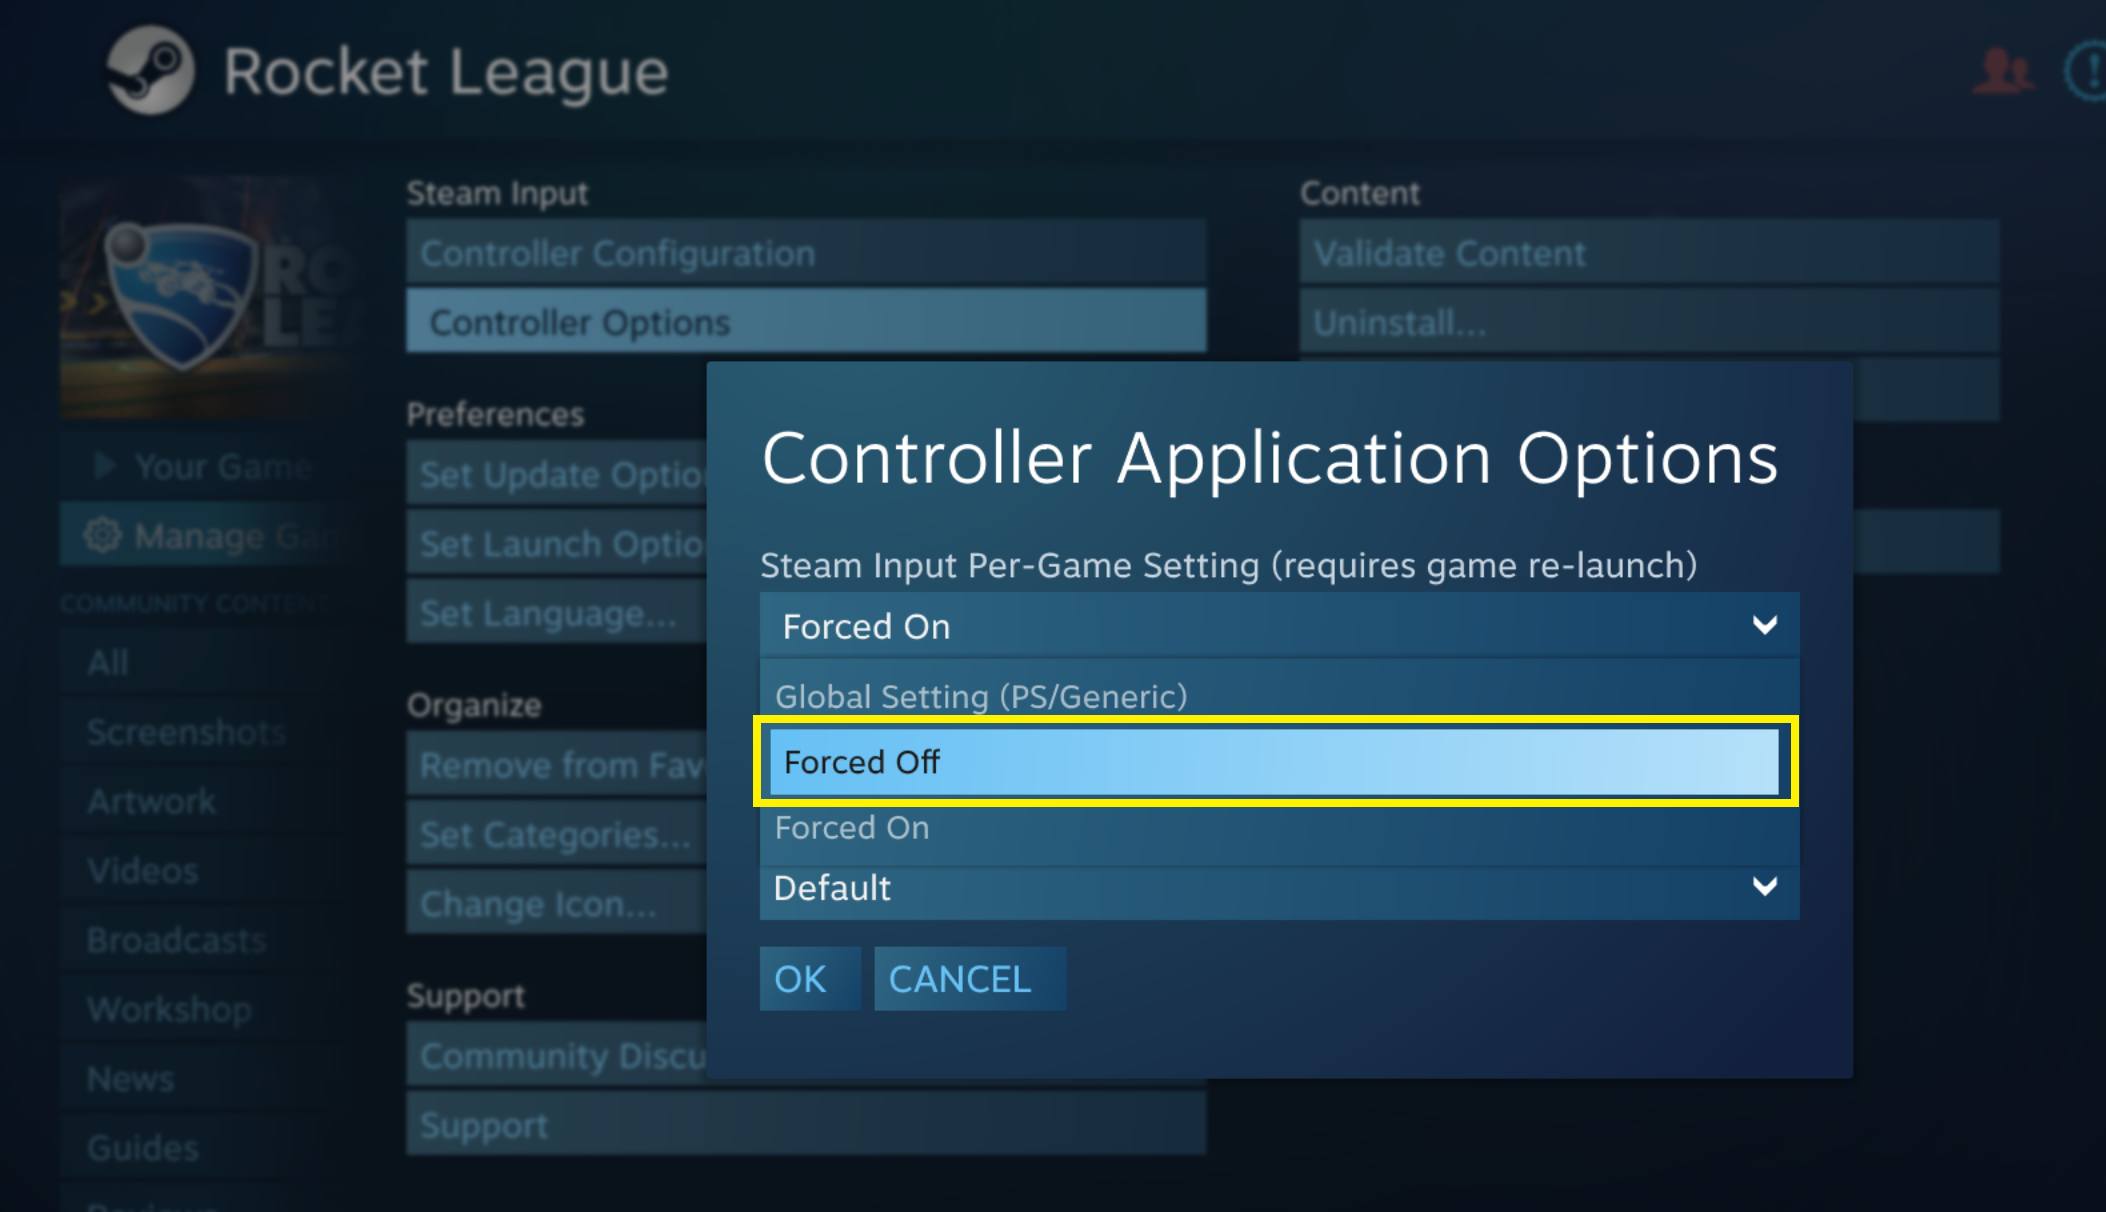 Disable Steam Inputs